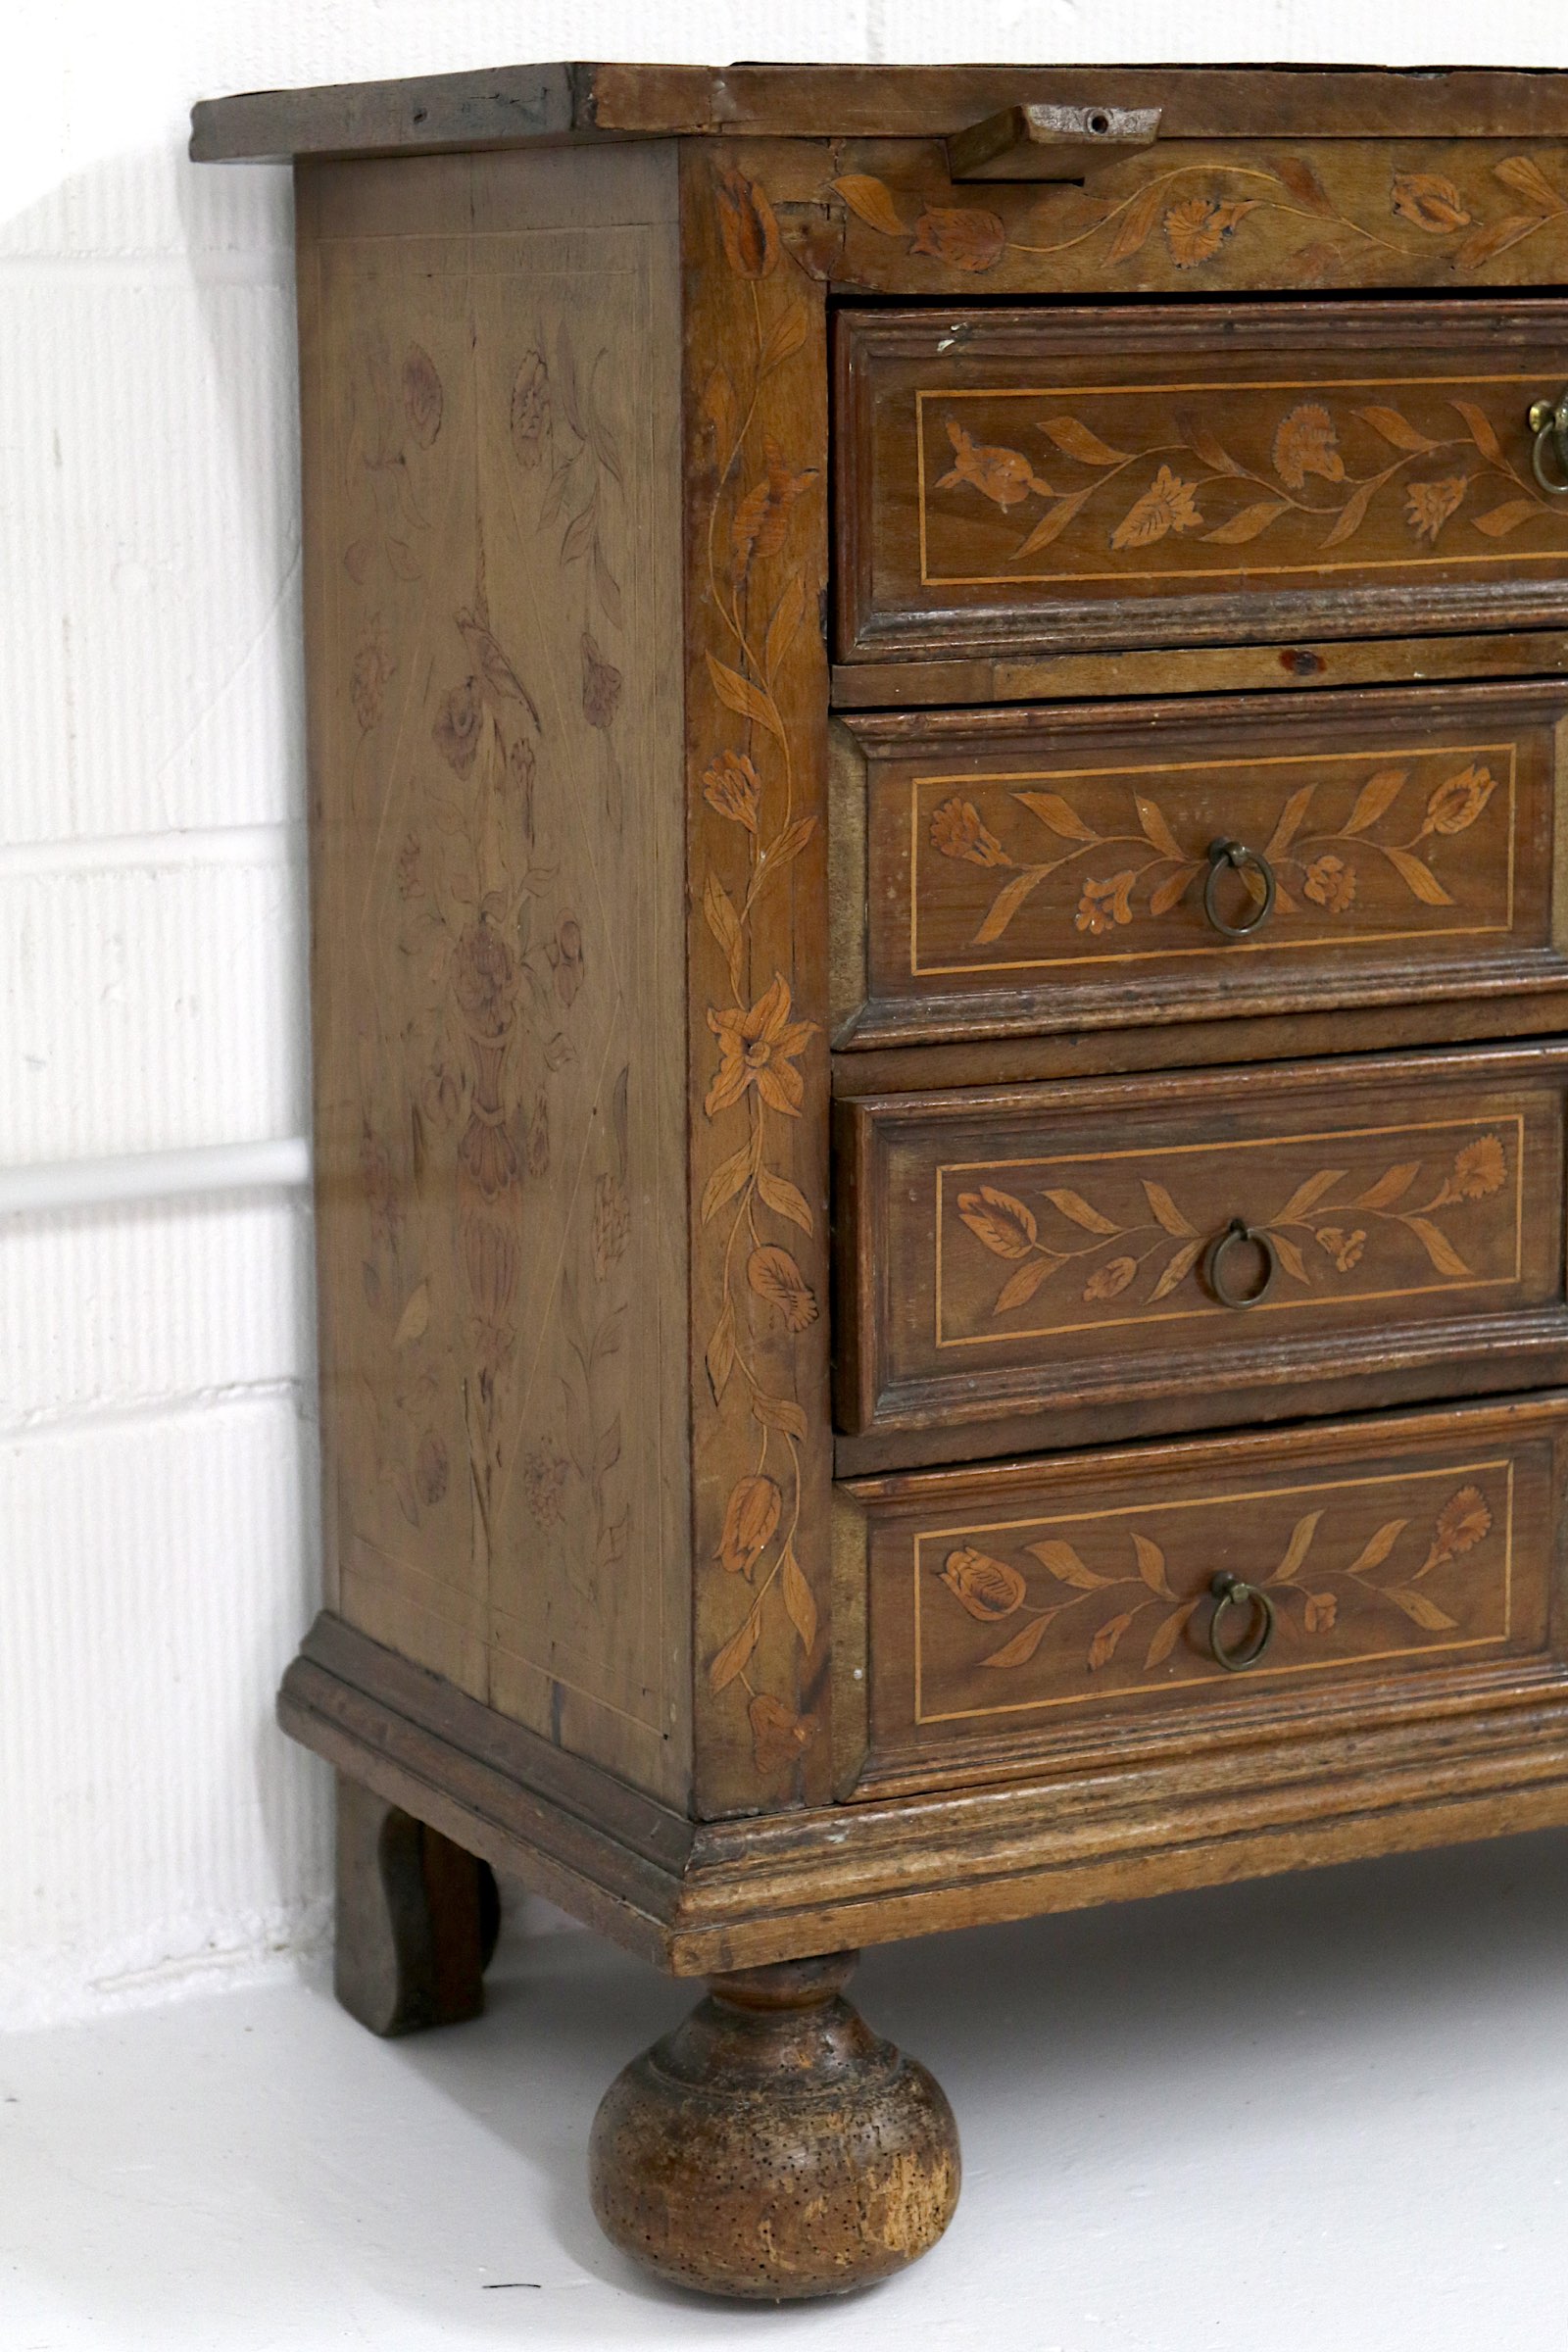 A small 18th Century Dutch walnut and floral marquetry inlaid chest, formerly a Bachelors chest, the - Image 2 of 3